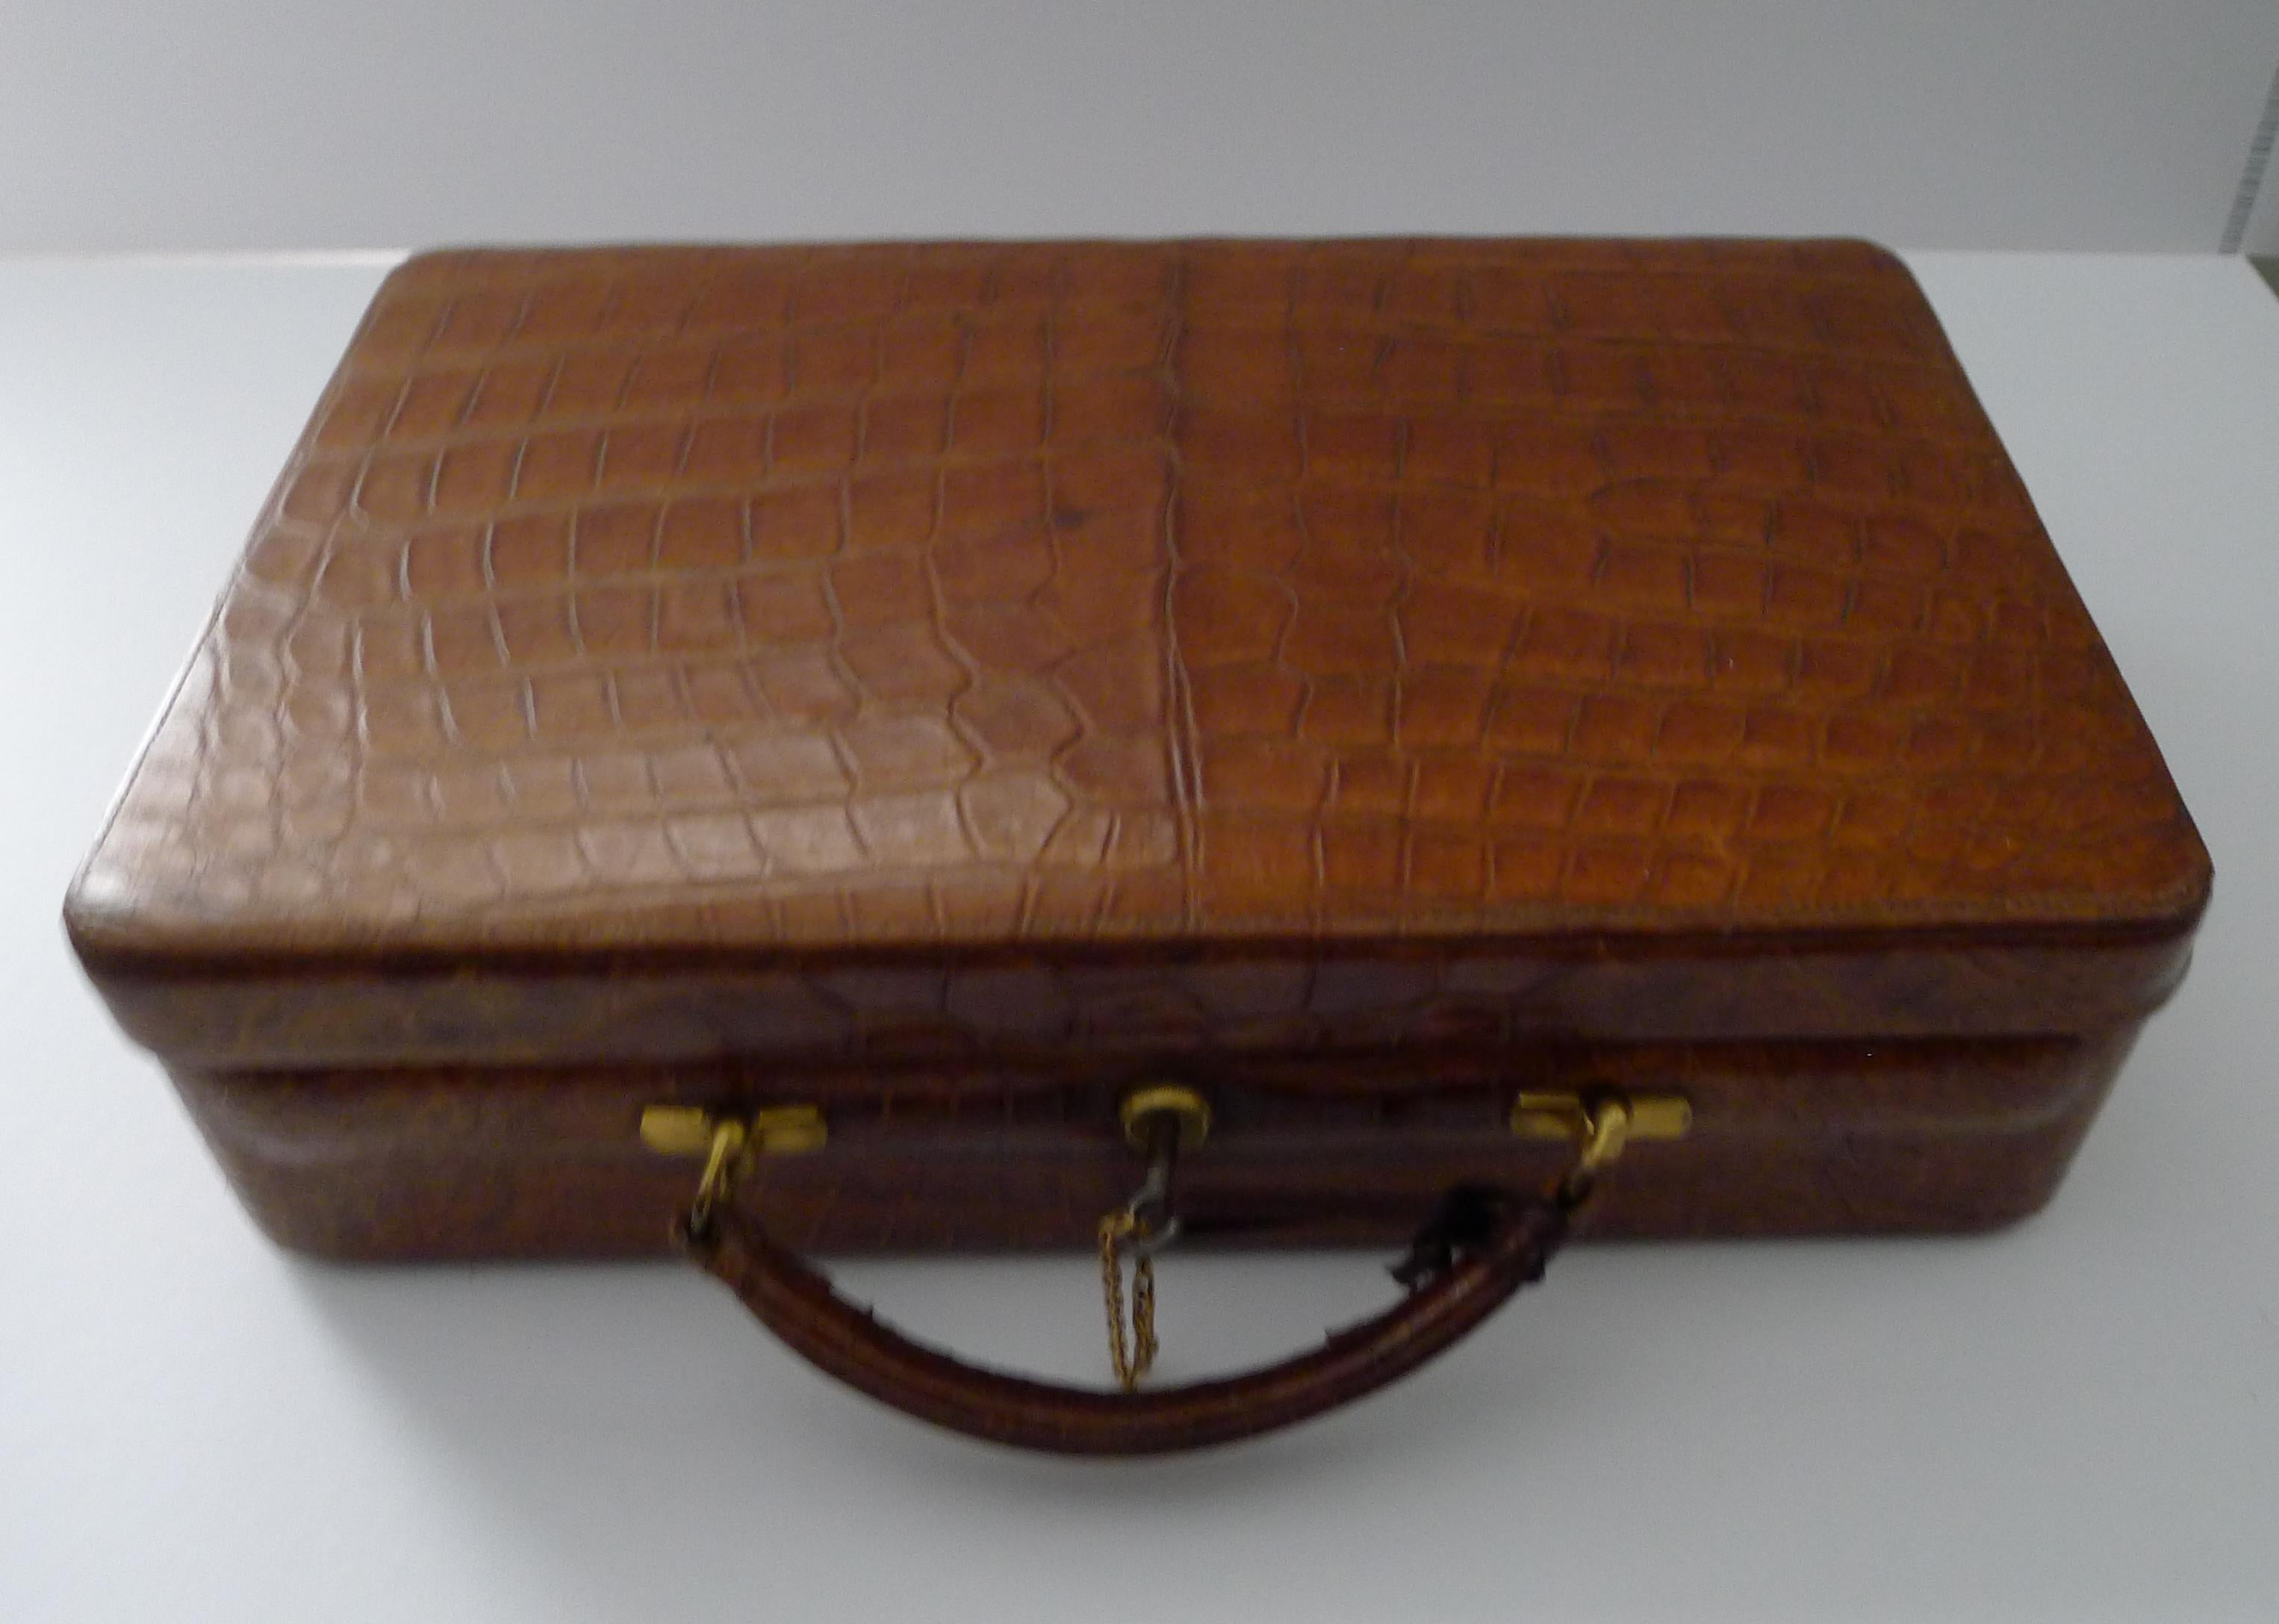 Edwardian Superb Antique English Crocodile Jewelry Box by Mappin & Webb For Sale